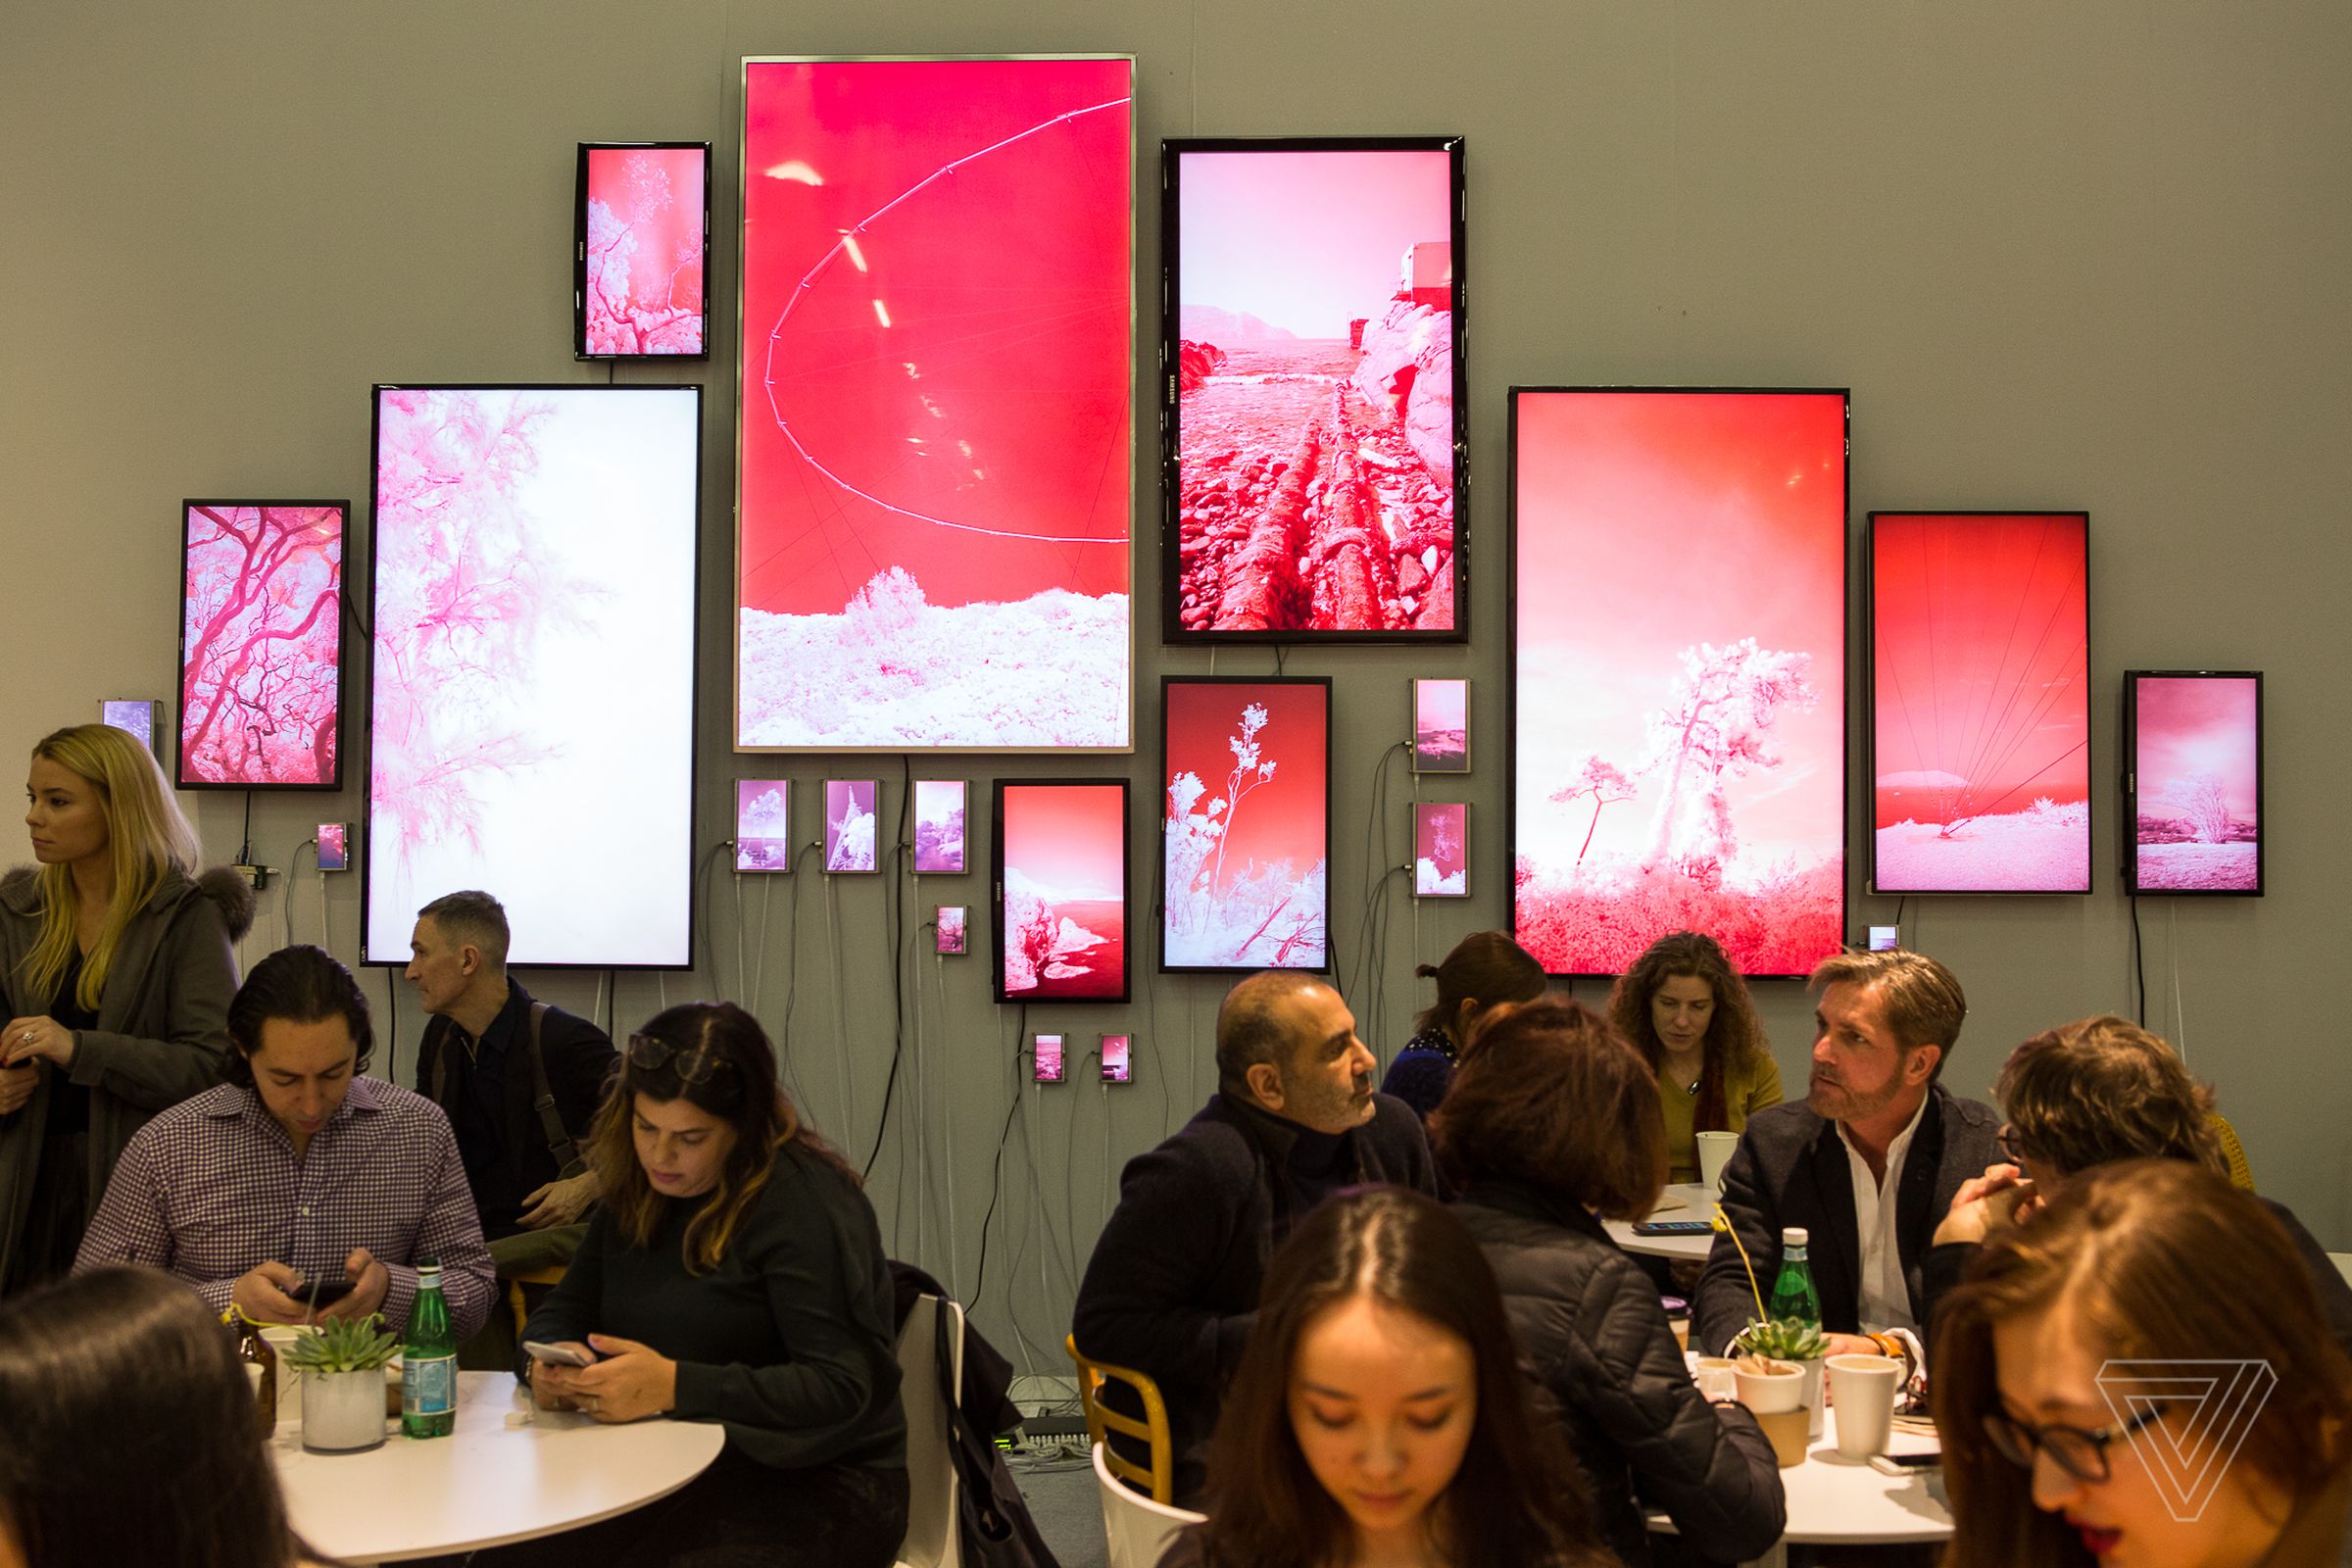 Evan Roth’s Landscapes hangs over visitors to The Armory Art Fair on pier 94 in Manhattan. Each screen displays video streamed from servers located in the country where it was recorded. There are eight different countries represented.